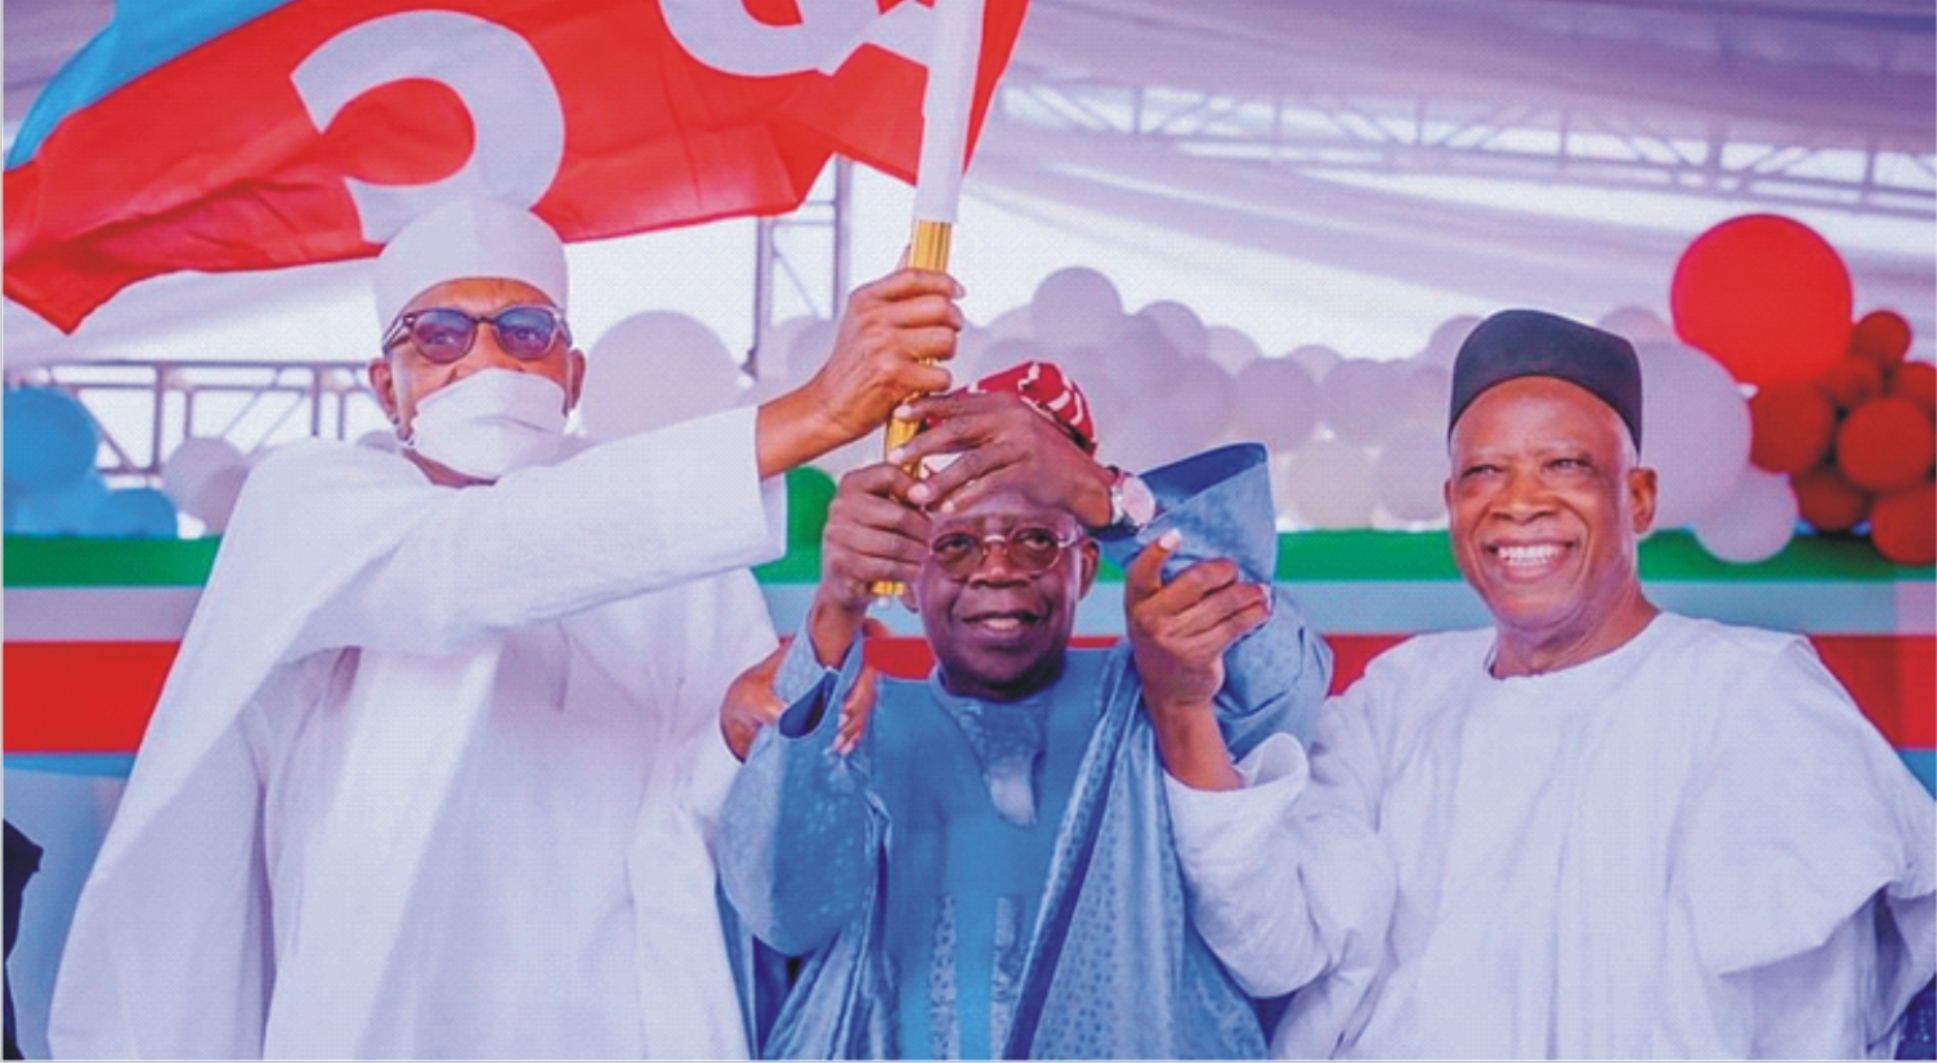 From left: President Muhammadu Buhari, presenting the All Progressives Congress (APC) flag, to the party's Presidential candidate, Asiwaju Bola Tinubu, while its National Chairman, Sen. Adamu Abdullahi watches, shortly after the party's primary election held in Abuja